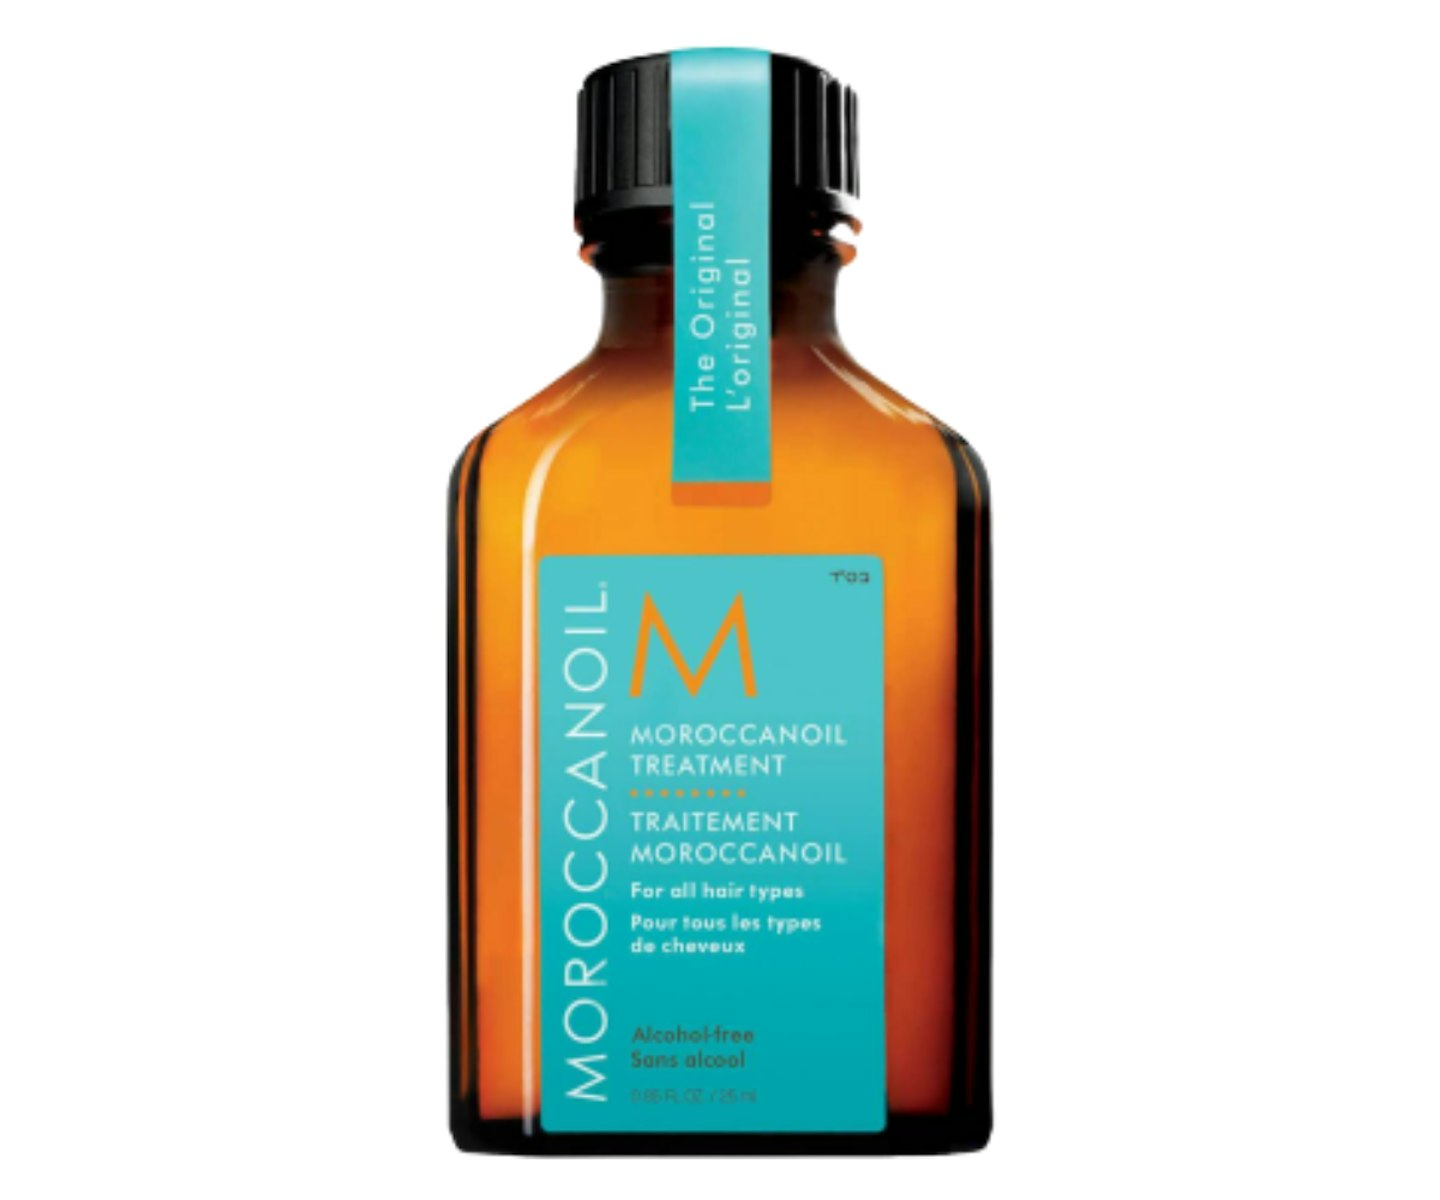 A picture of the Moroccanoil Hair Treatment